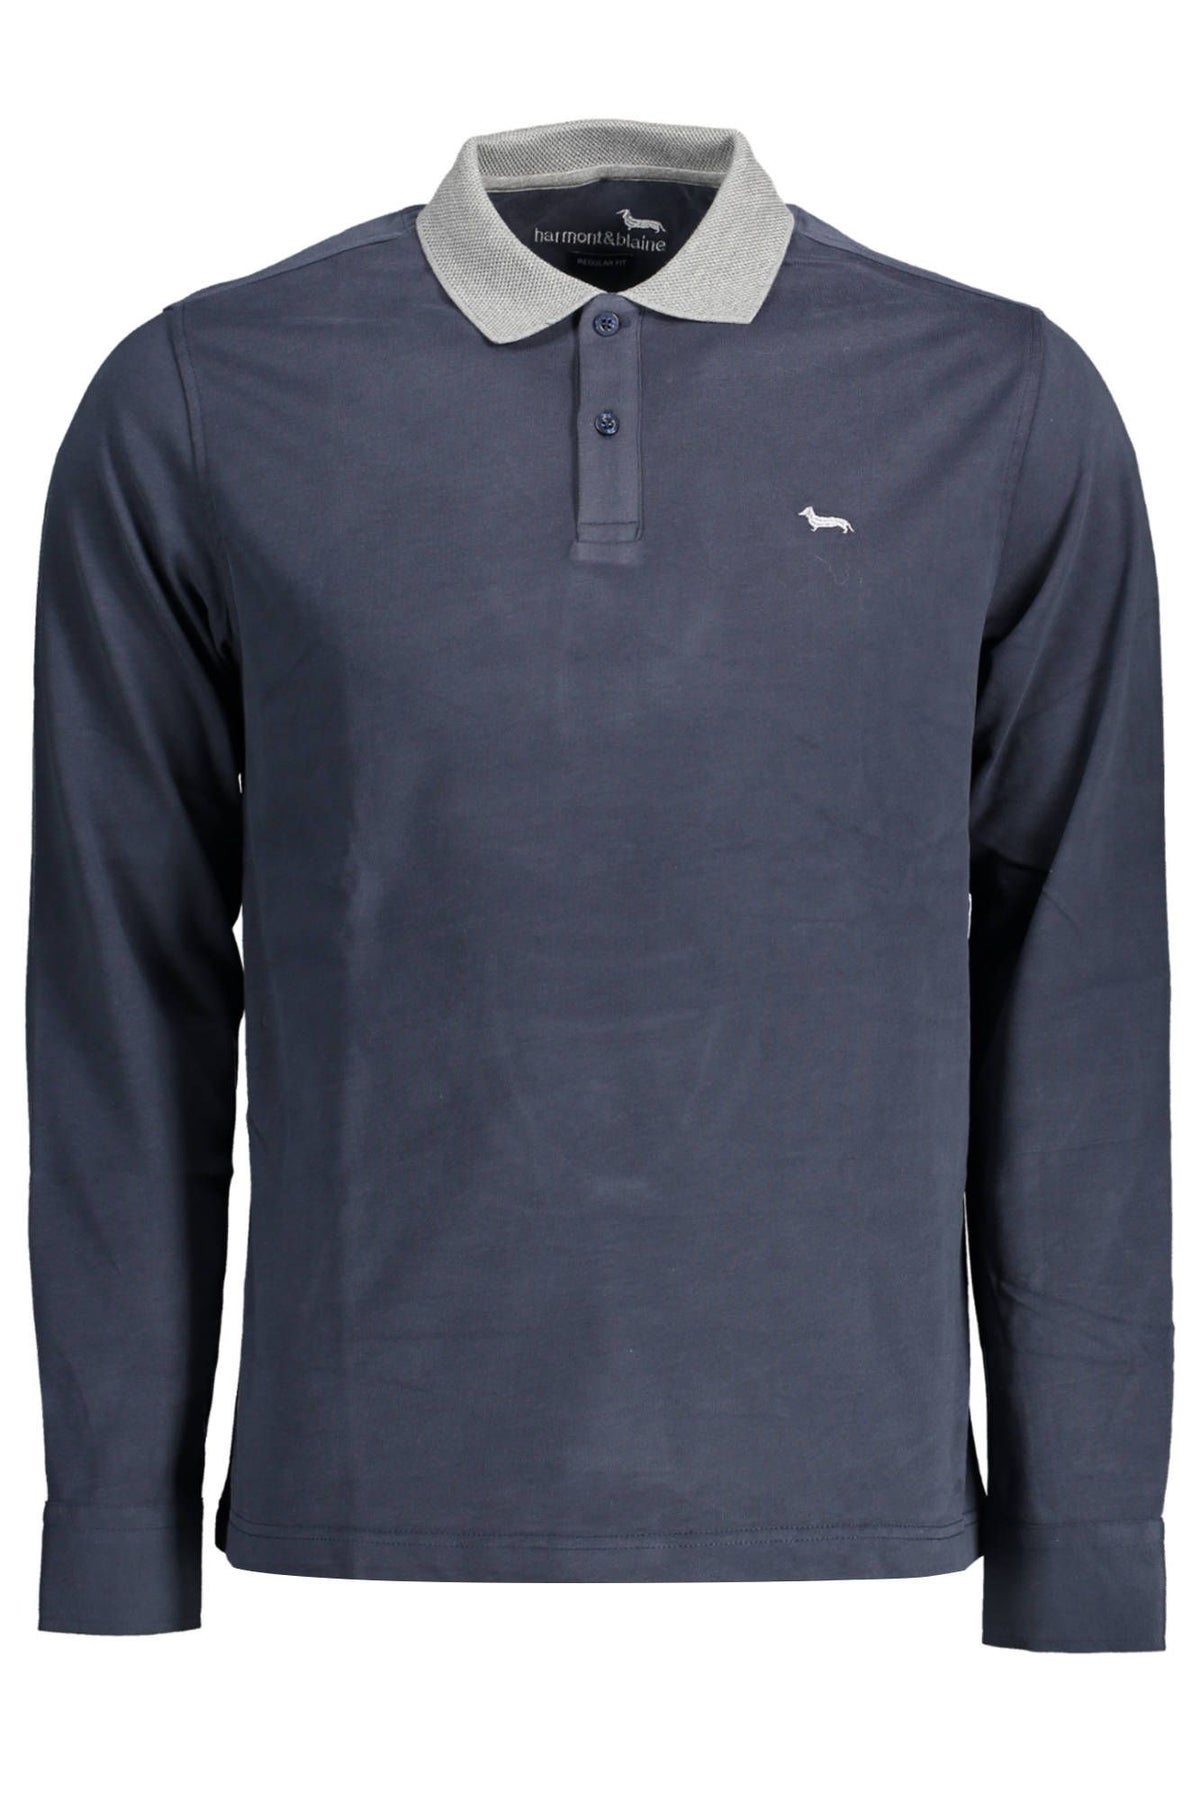 Harmont & Blaine Refined Blue Cotton Polo with Contrast Detailing